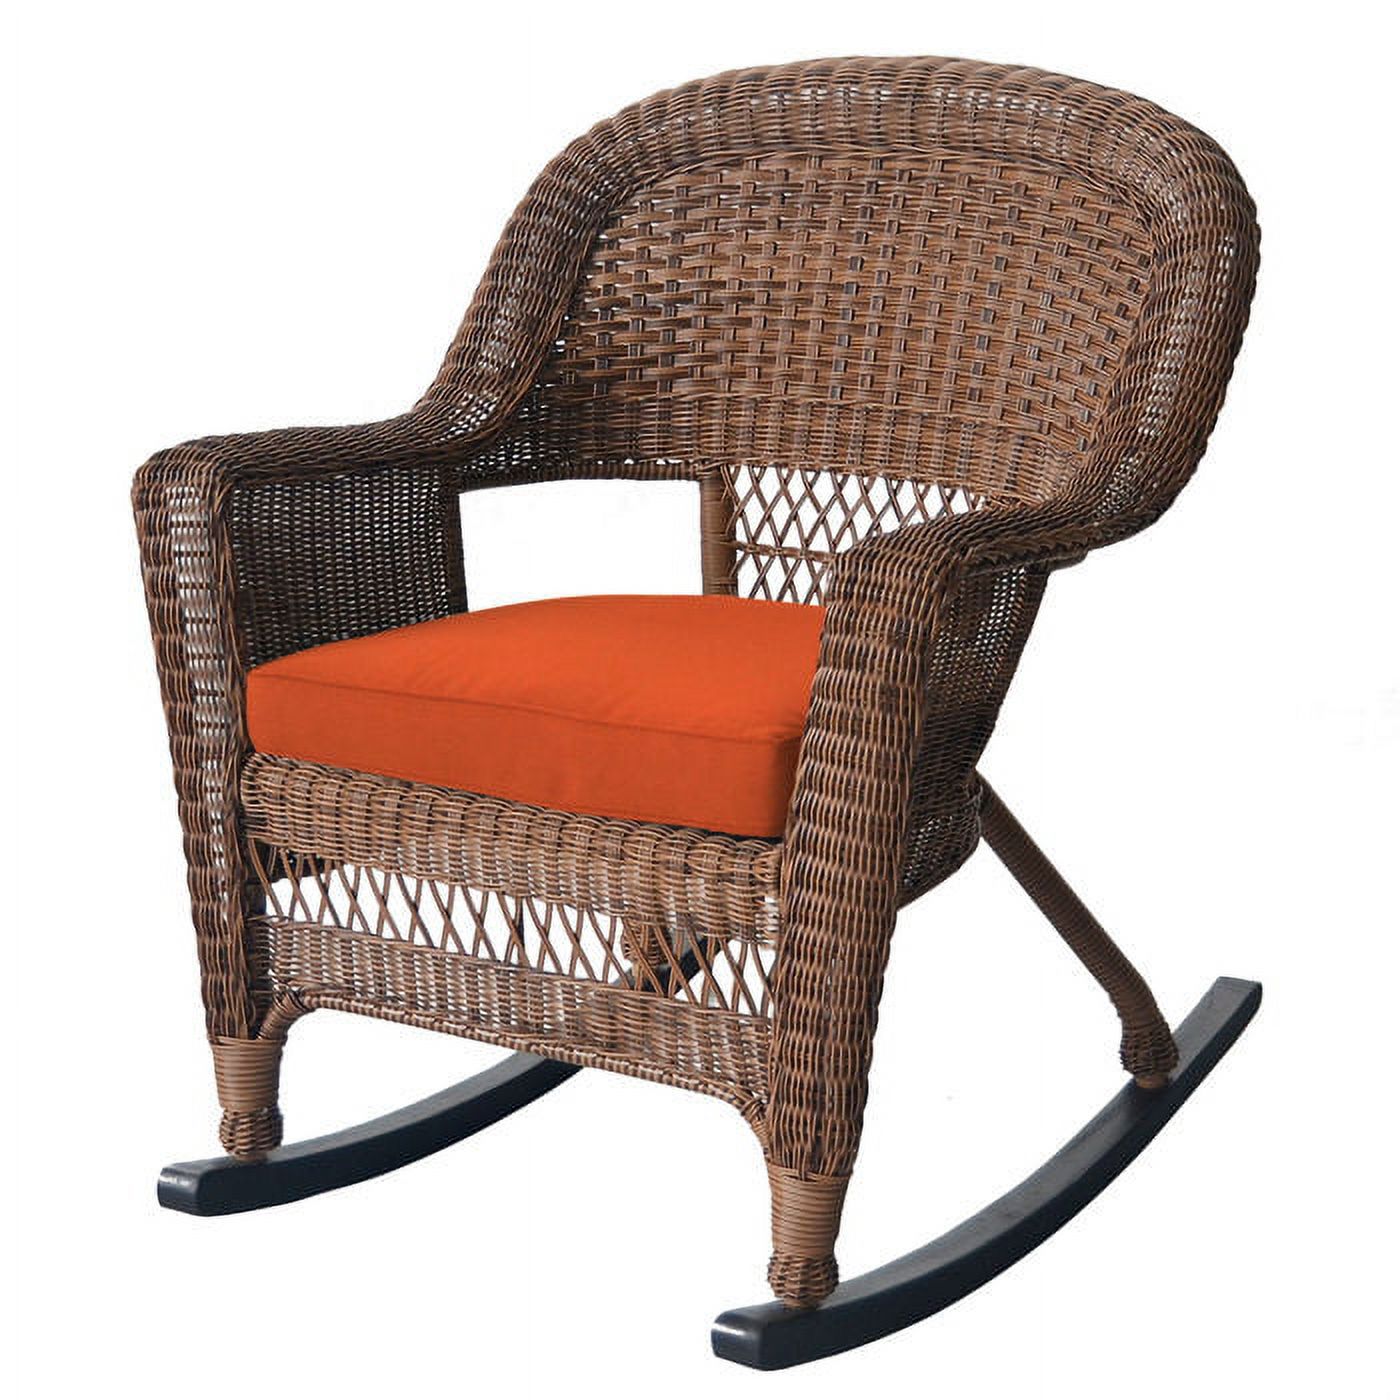 Jeco 3pc Rocker Wicker Chair Set With Red Cushion-Finish:Black - image 3 of 4